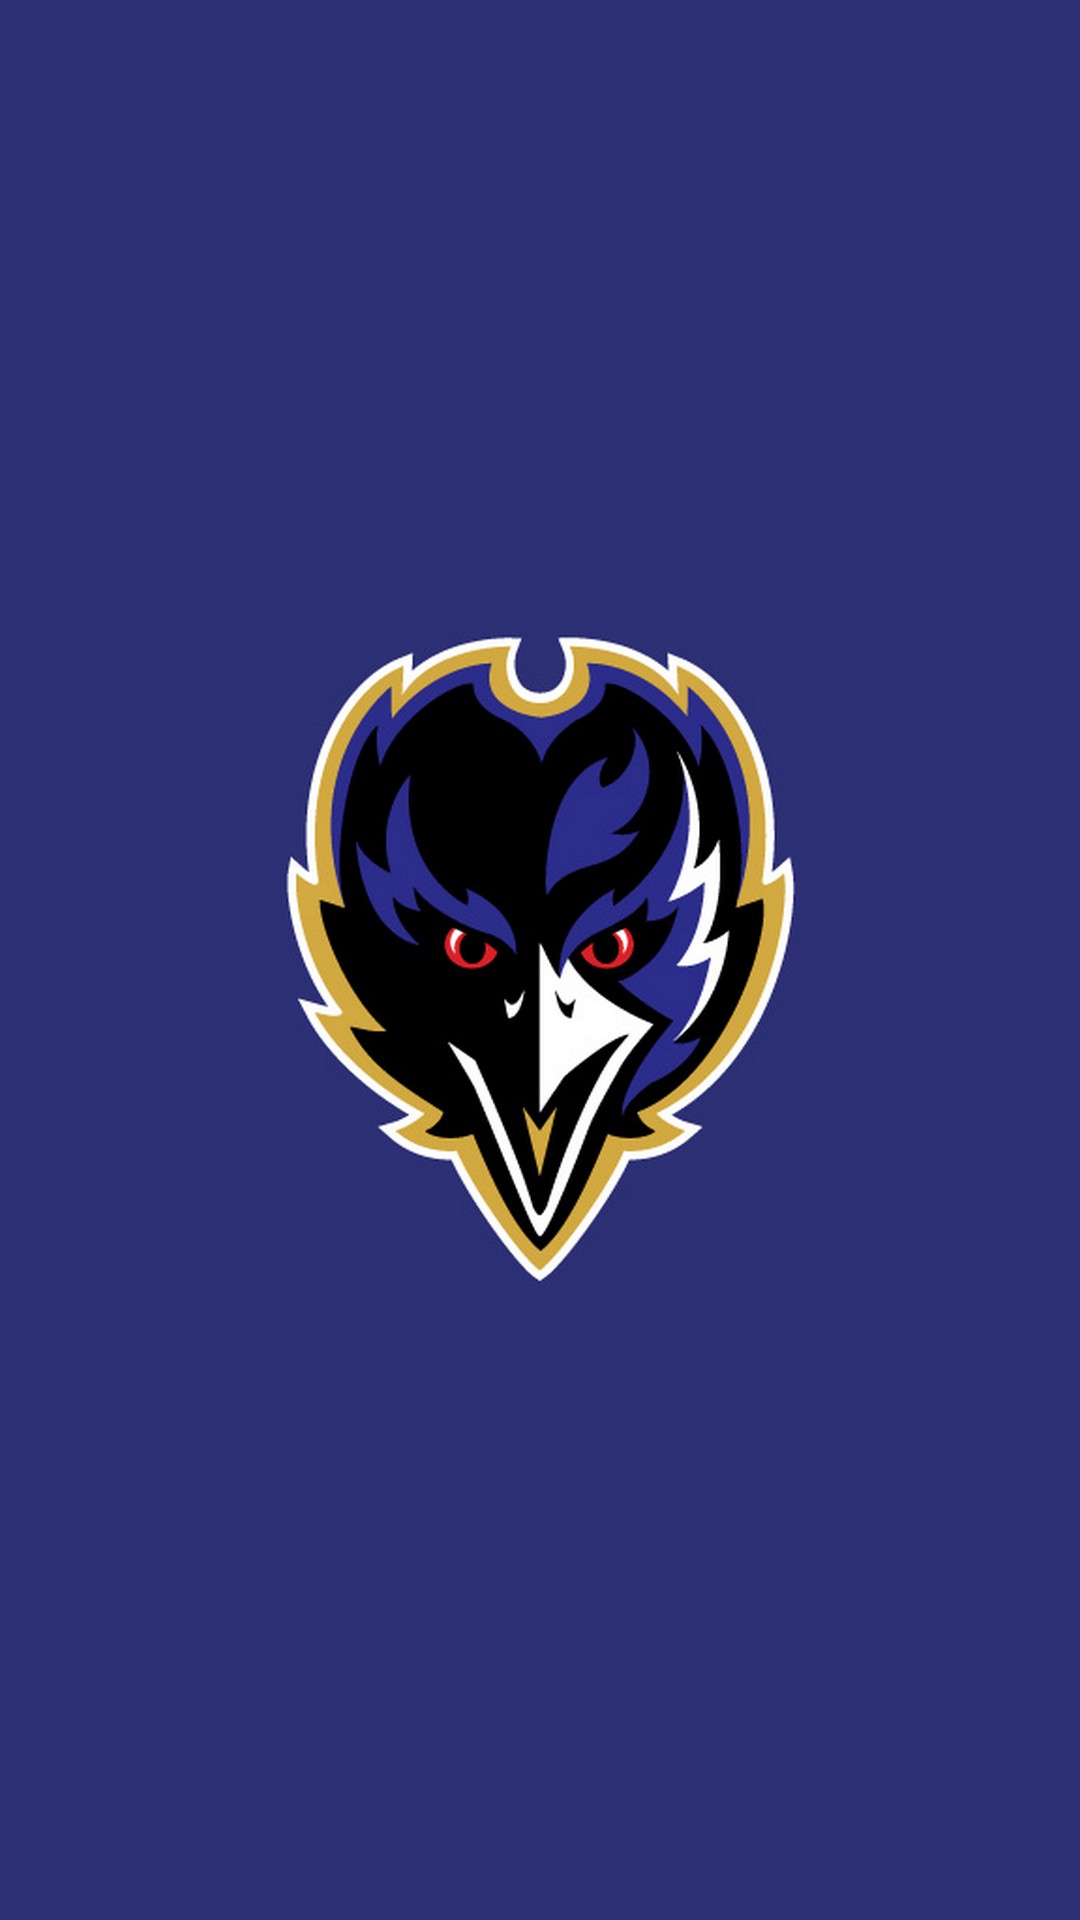 Screensaver iPhone Baltimore Ravens With high-resolution 1080X1920 pixel. Donwload and set as wallpaper for your iPhone X, iPhone XS home screen backgrounds, XS Max, XR, iPhone8 lock screen wallpaper, iPhone 7, 6, SE, and other mobile devices